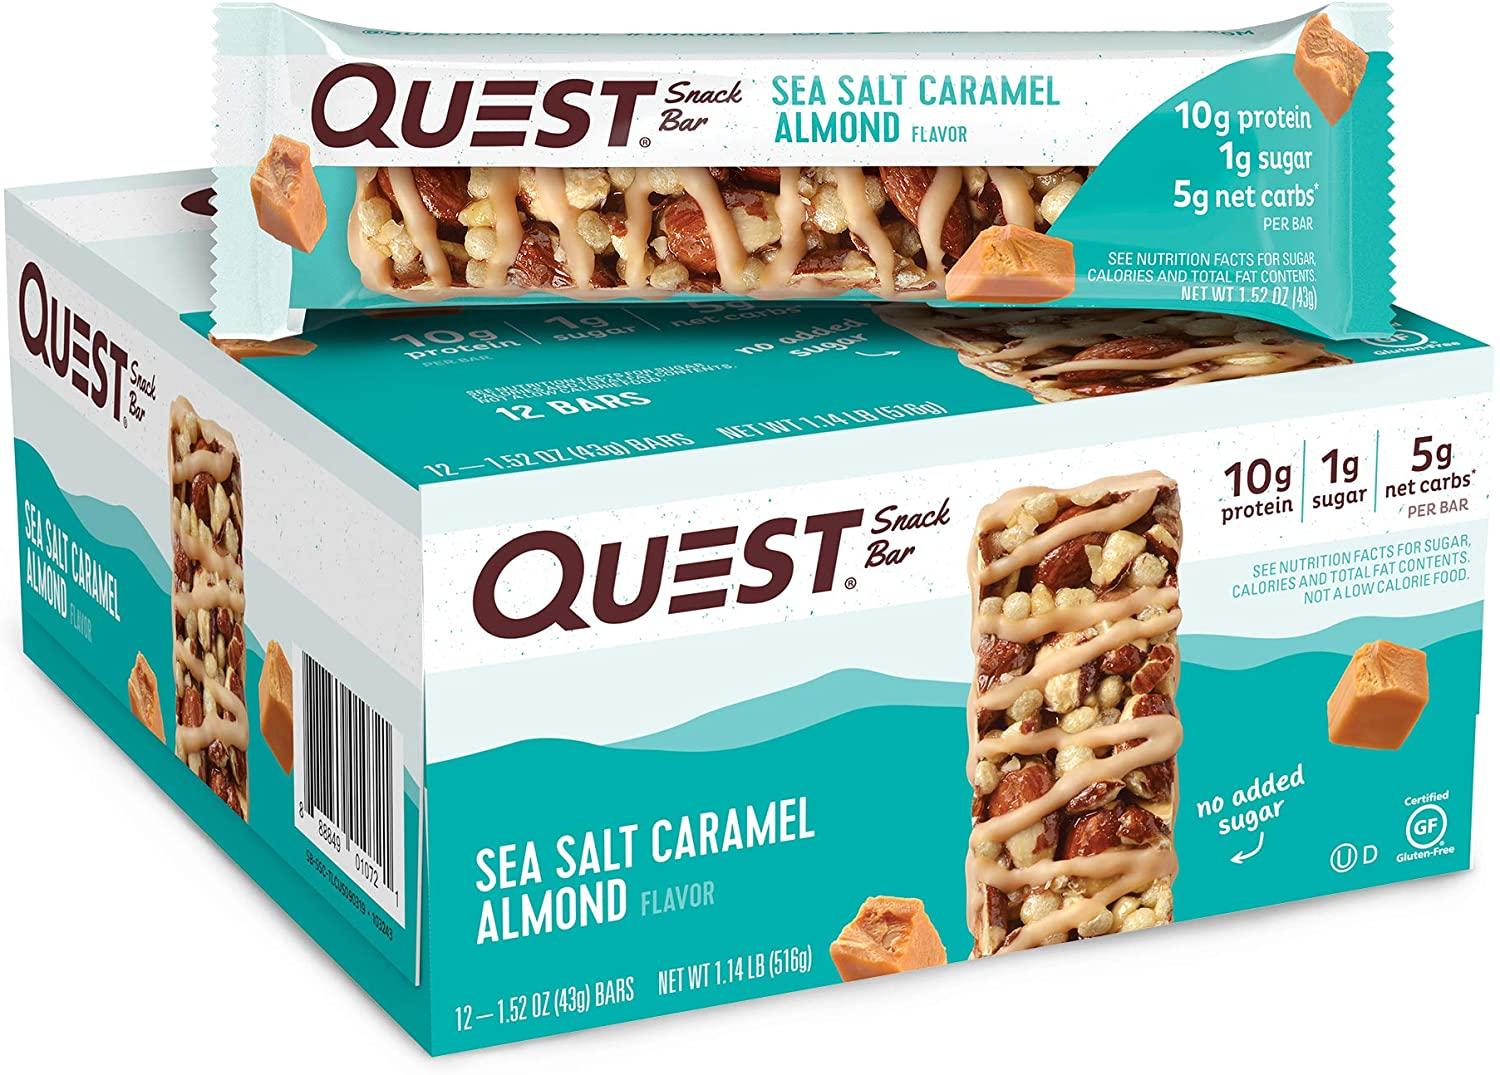 12 Quest Nutrition 10g Protein Snack Bars for $10.78